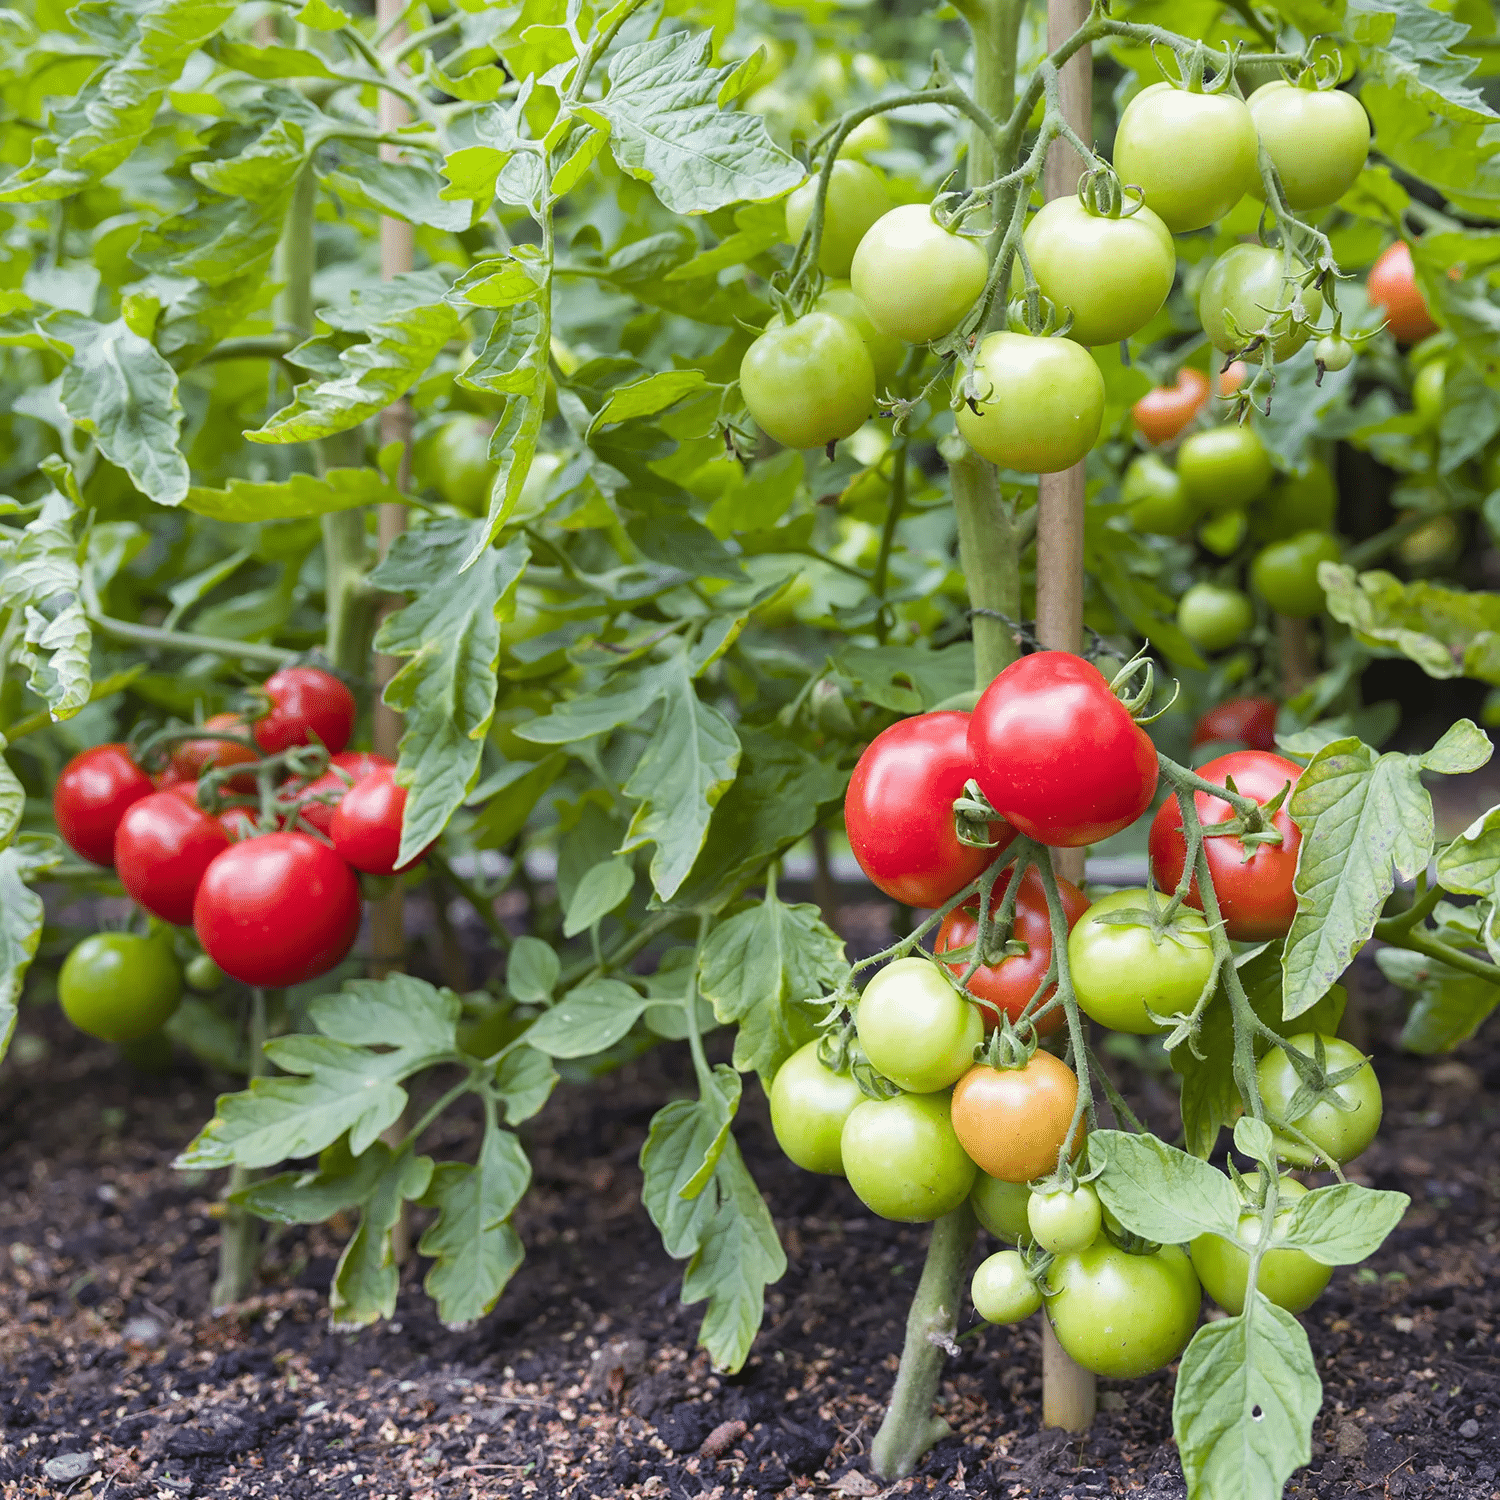 Determinate tomato plant variety that is drought tolerant